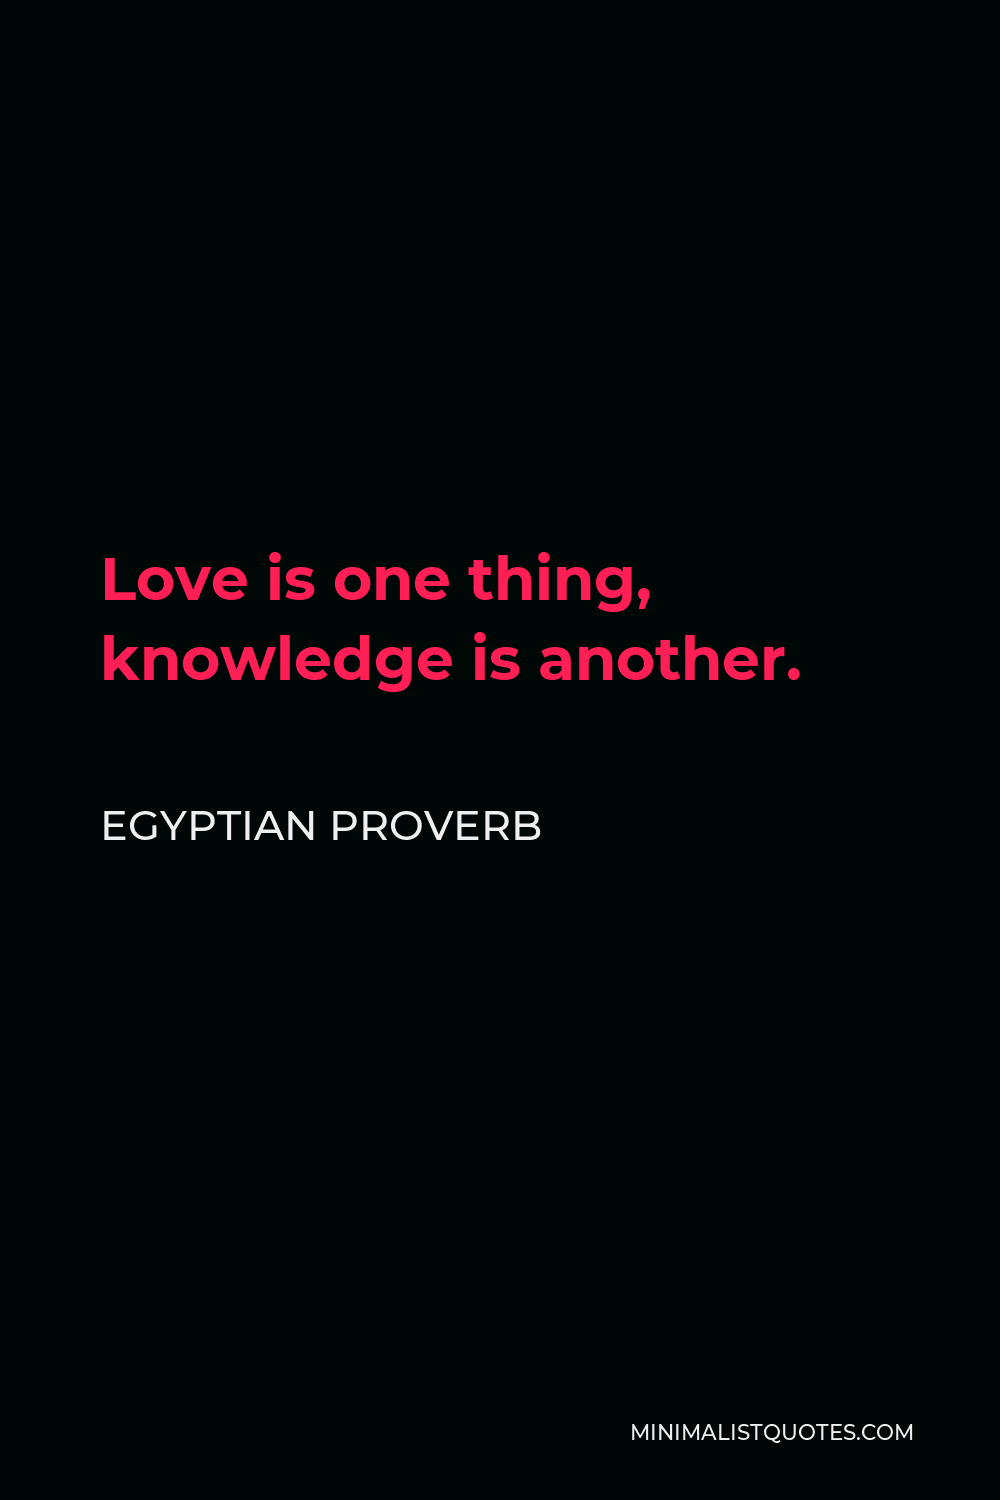 Egyptian Proverb Quote - Love is one thing, knowledge is another.